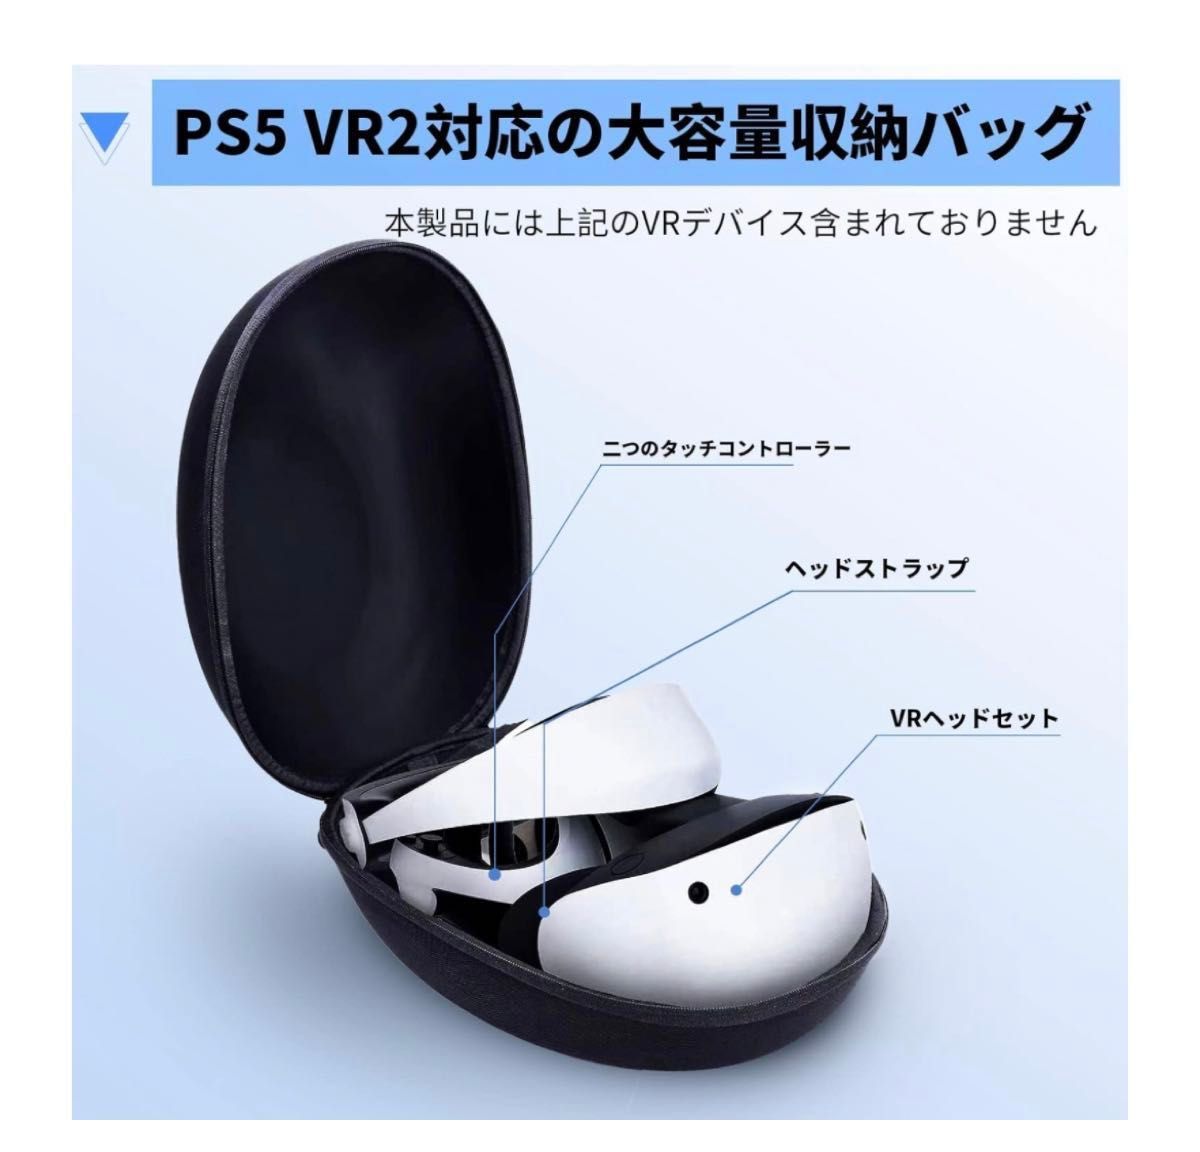 For PS VR2 収納バッグ 保護カバー キャリングバッグ 収納ケース 多機能対応 Play*Station VRデバイス収納